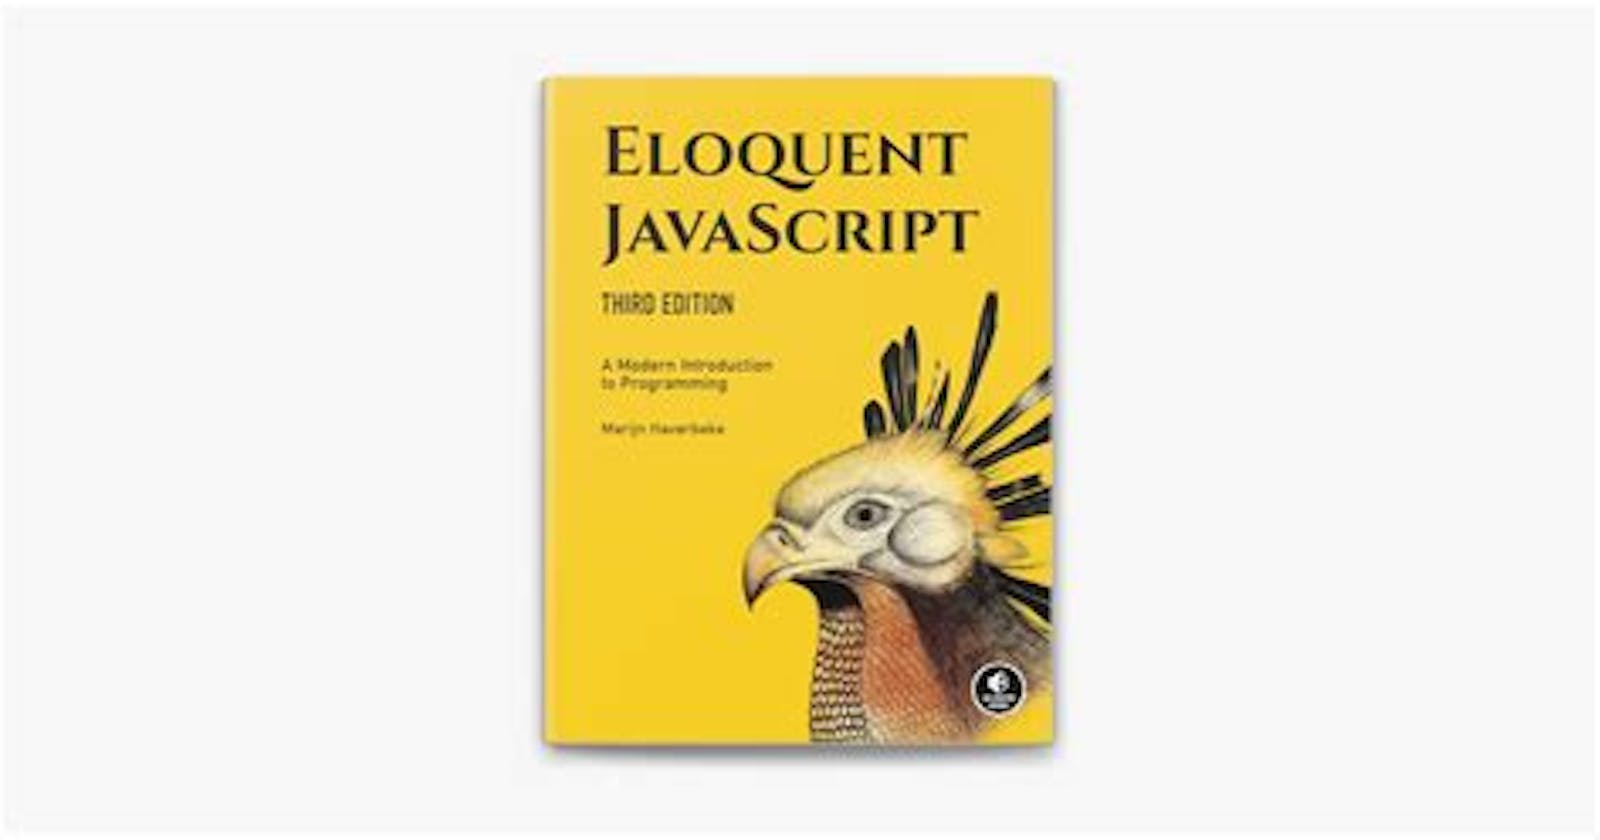 Book Club: Eloquent Javascript - Chapter One